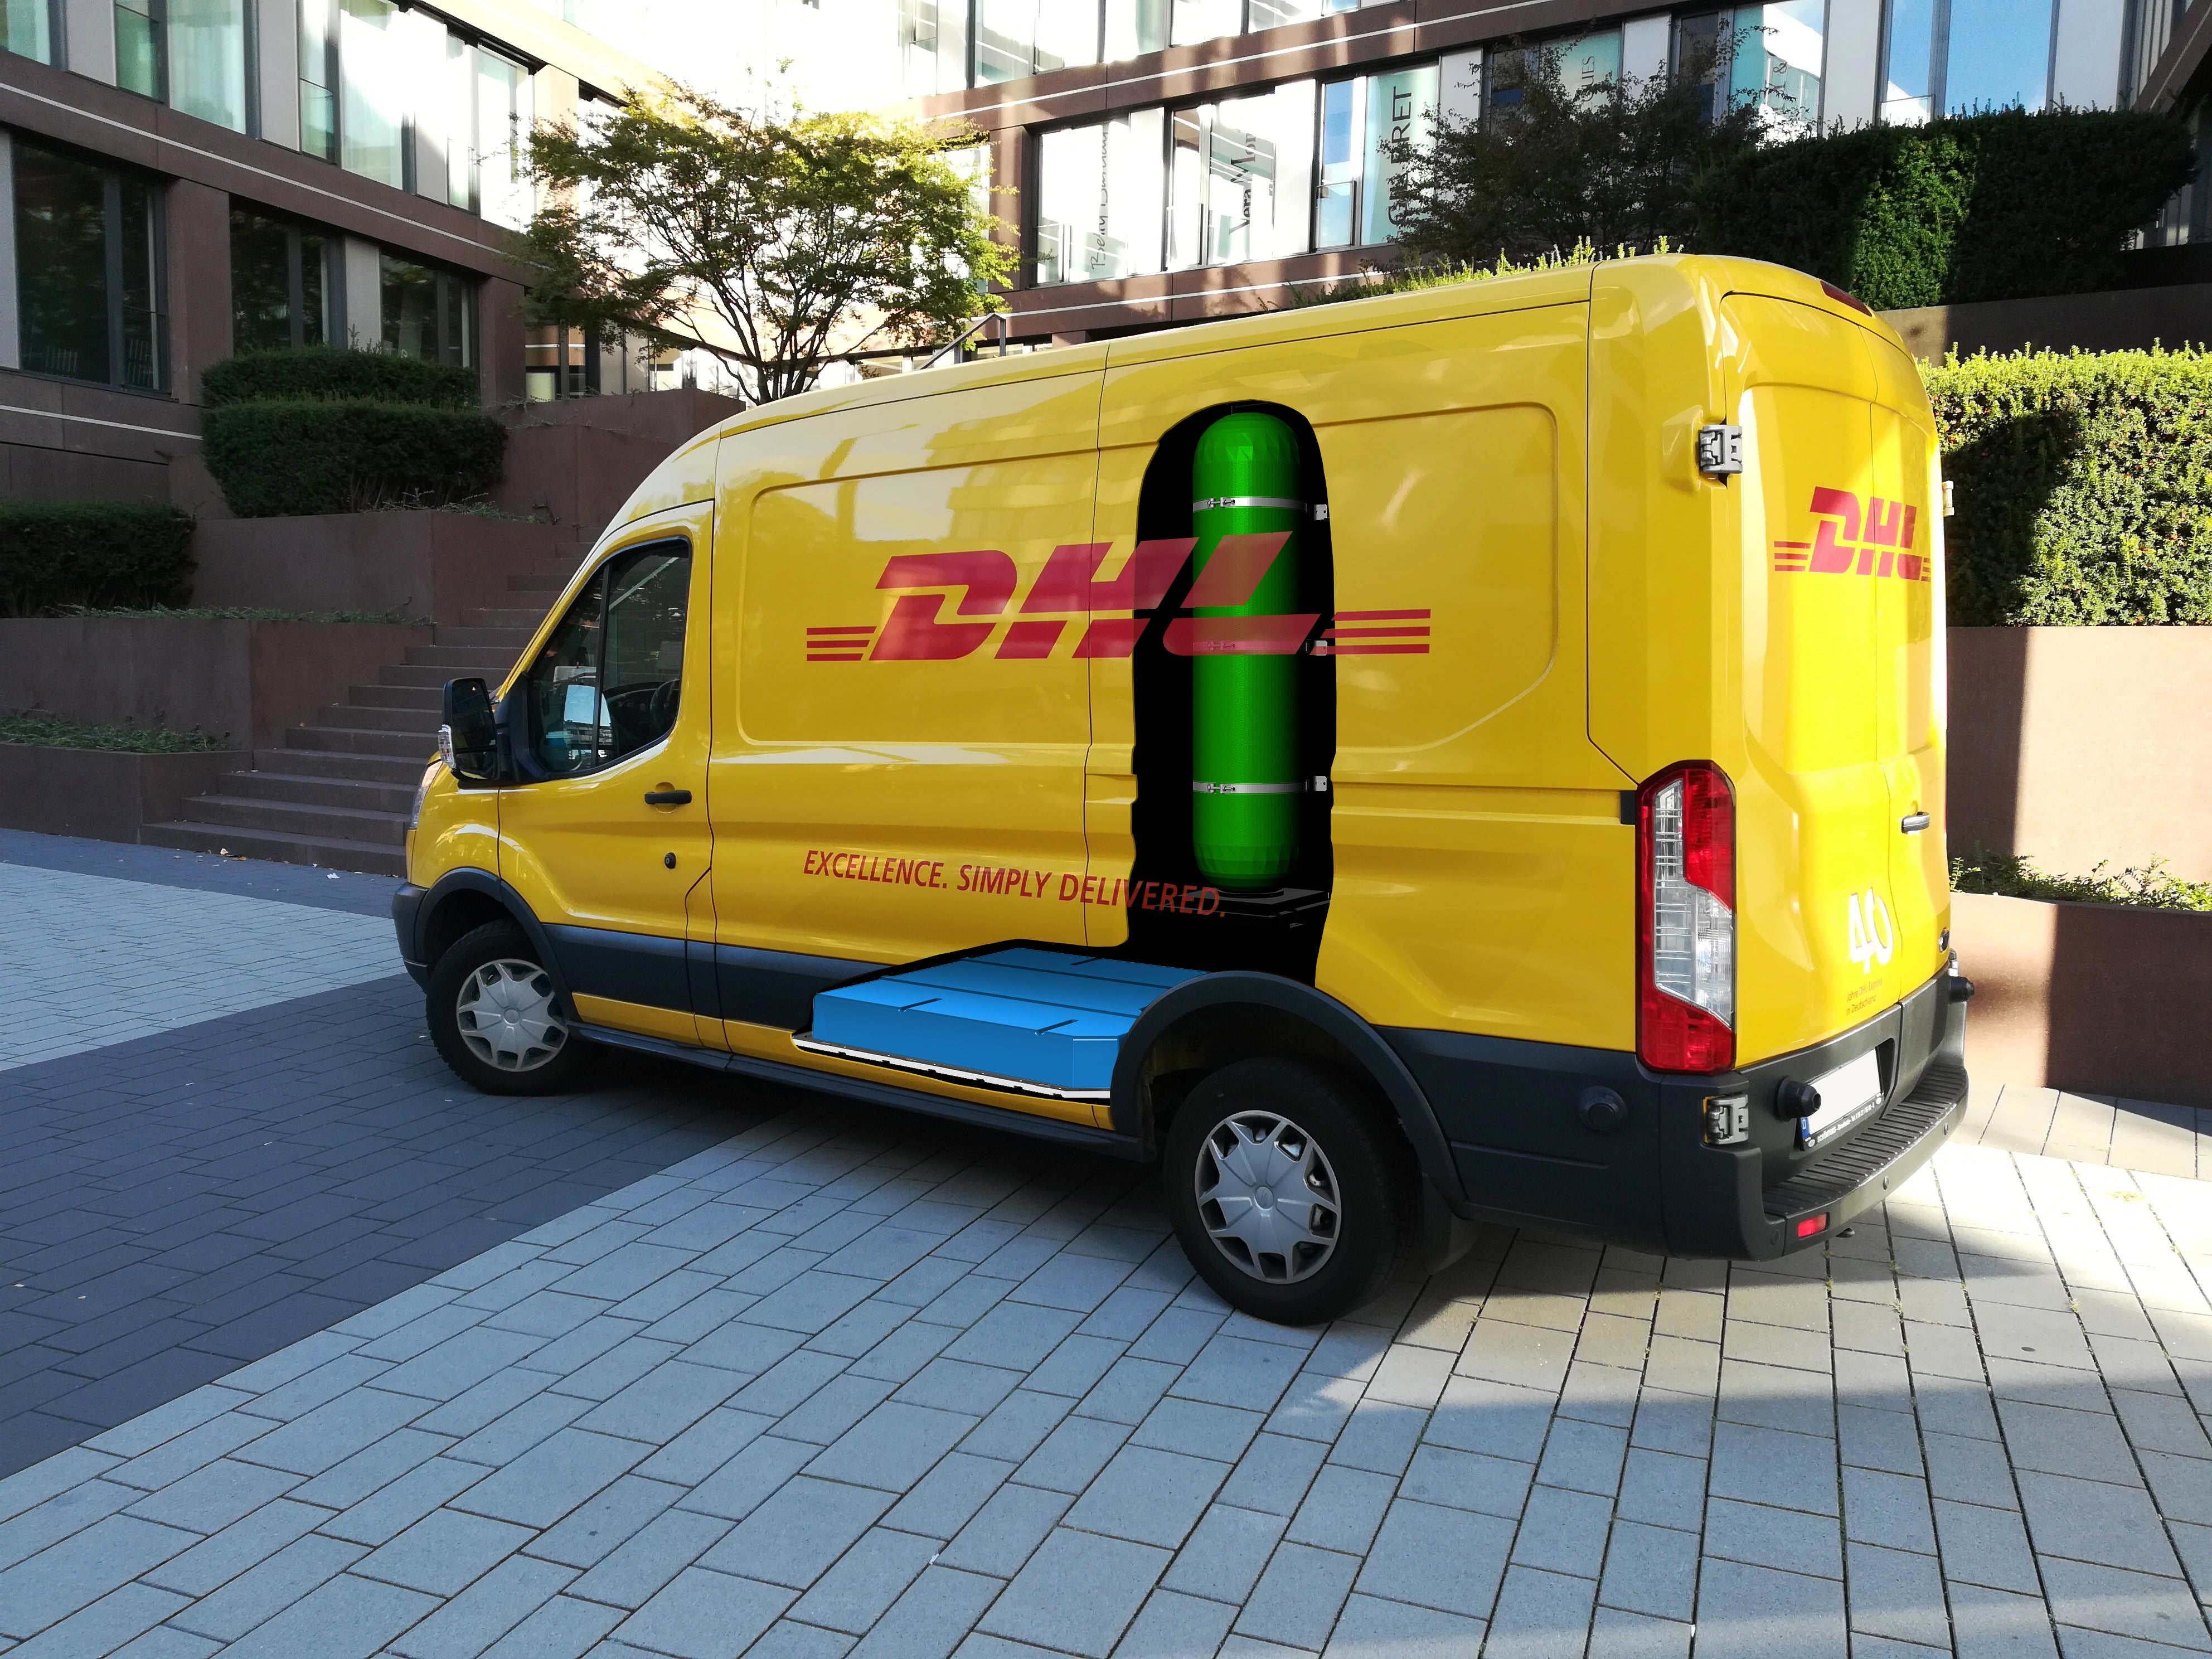 DHL is set to invest £482m across its UK e-commerce operation (DHL/PA)